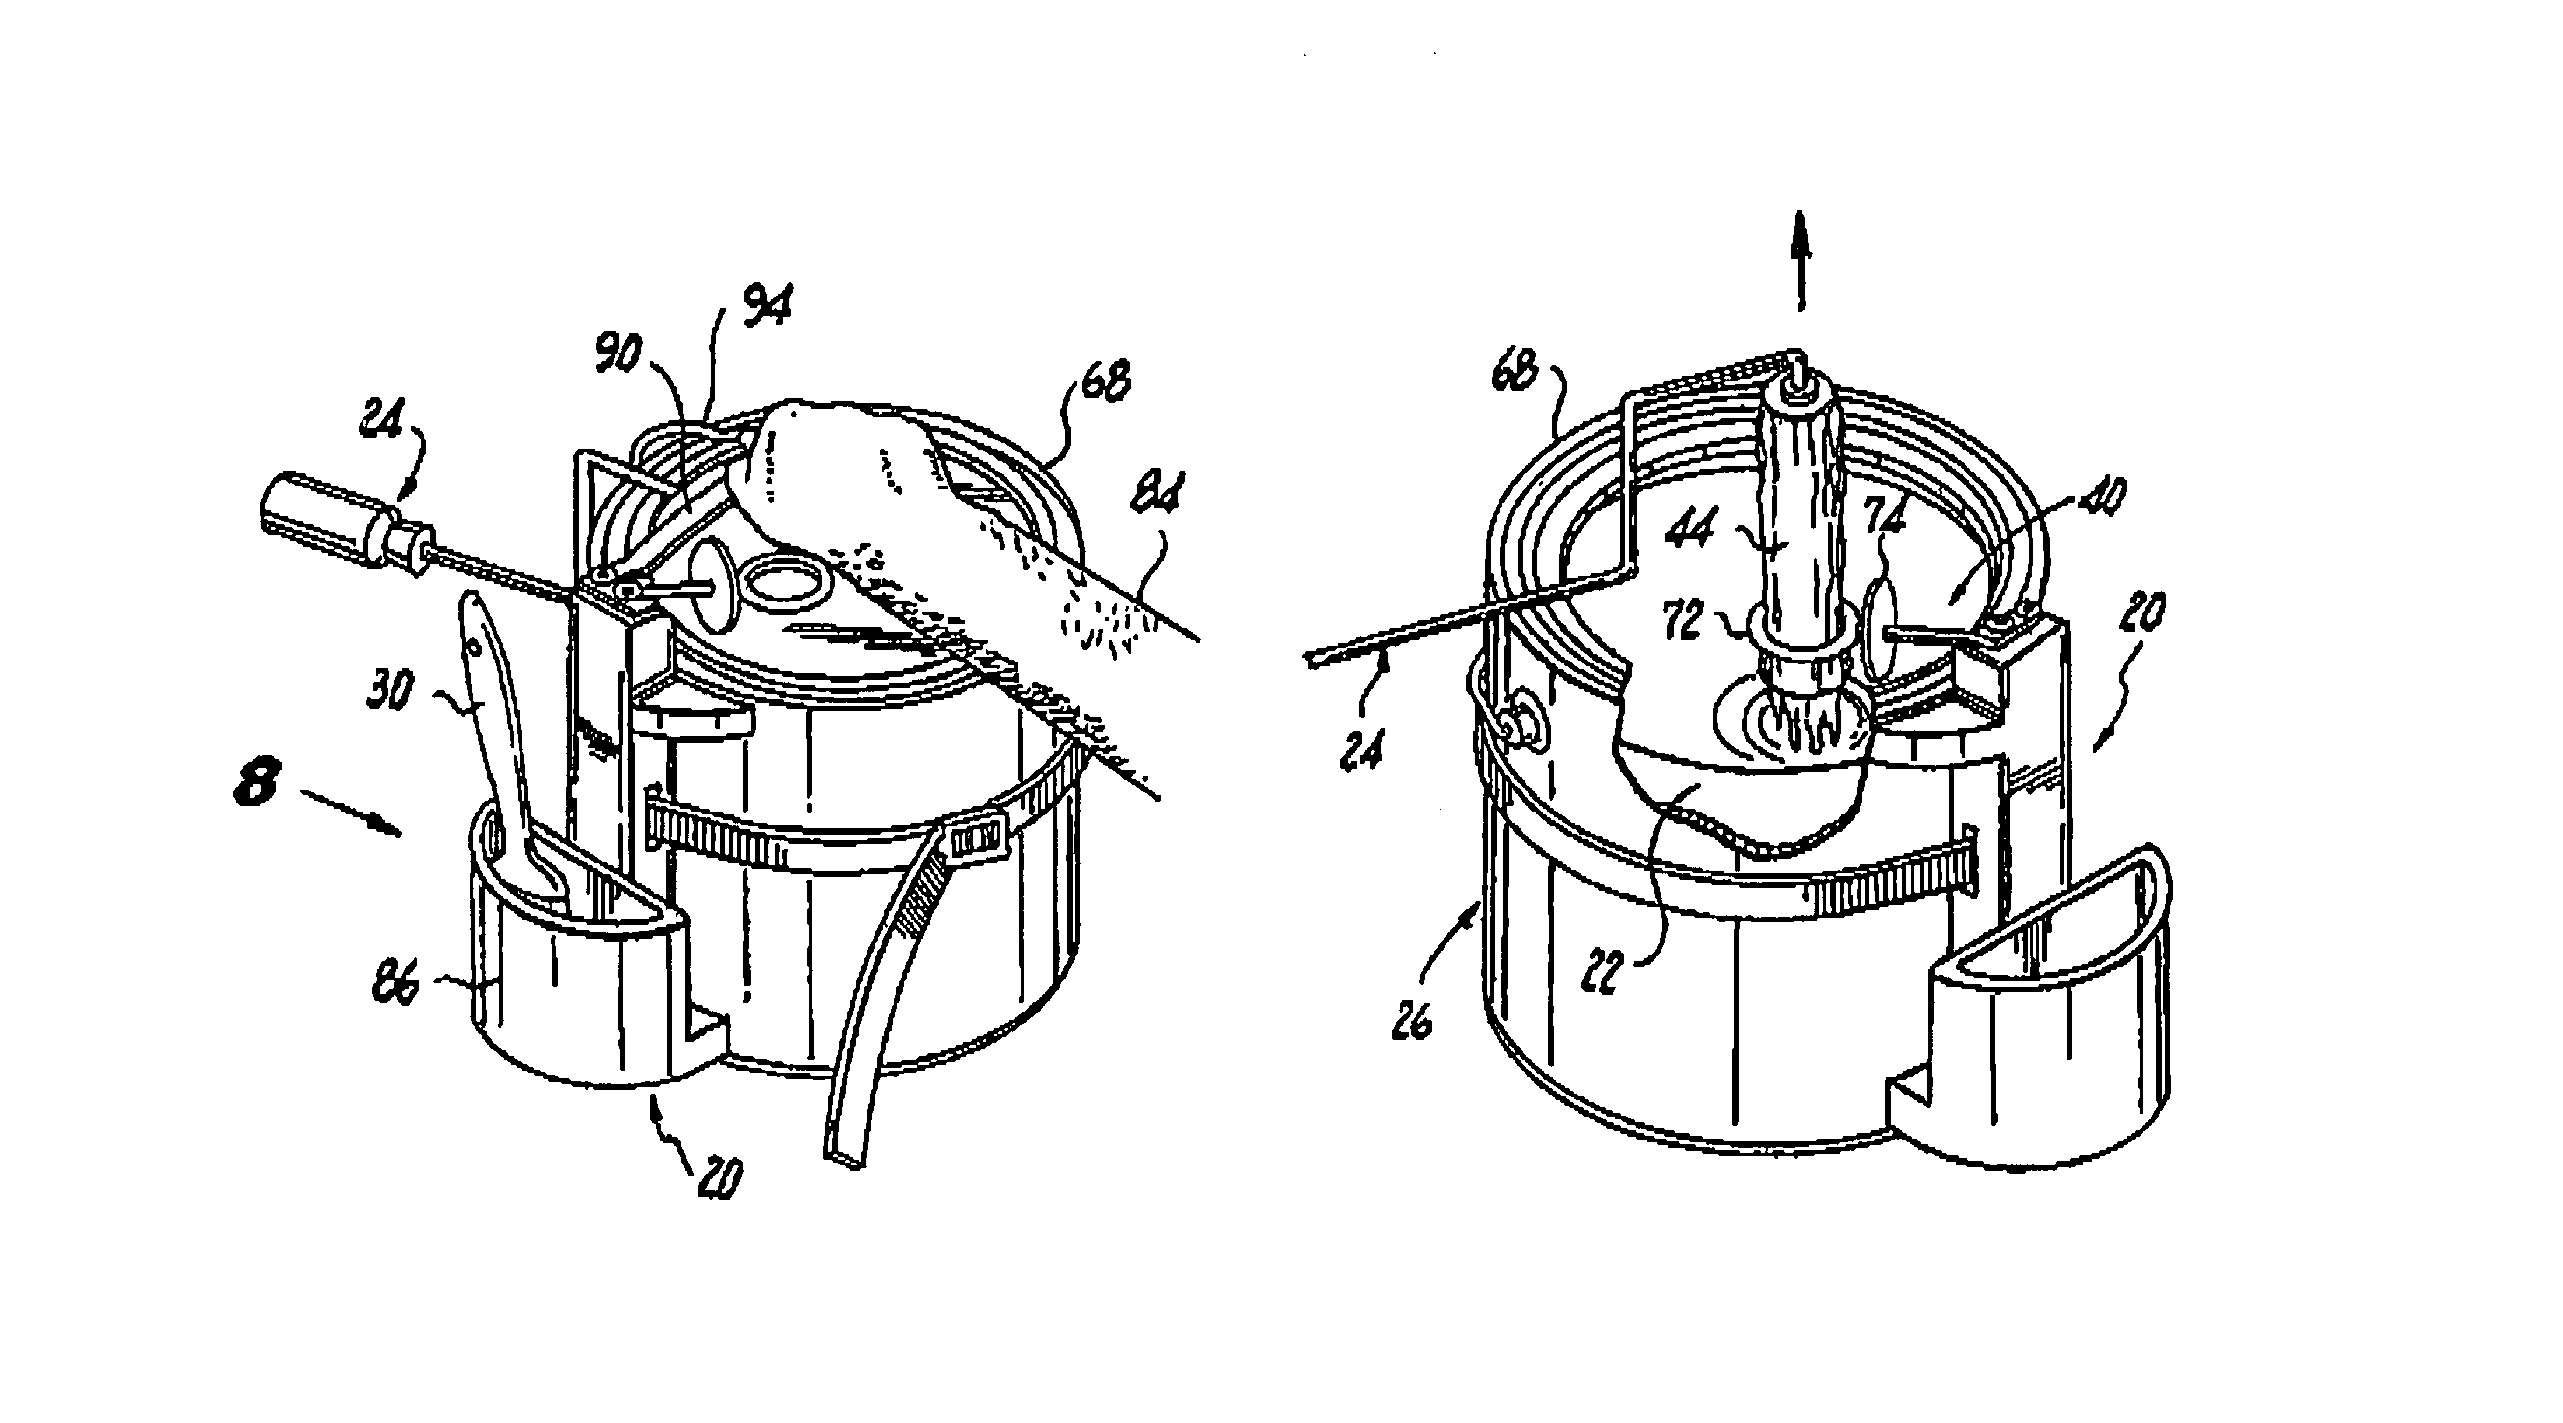 Apparatus for delivering paint to a paint roller directly from a paint can with a compartment for holding a paint brush